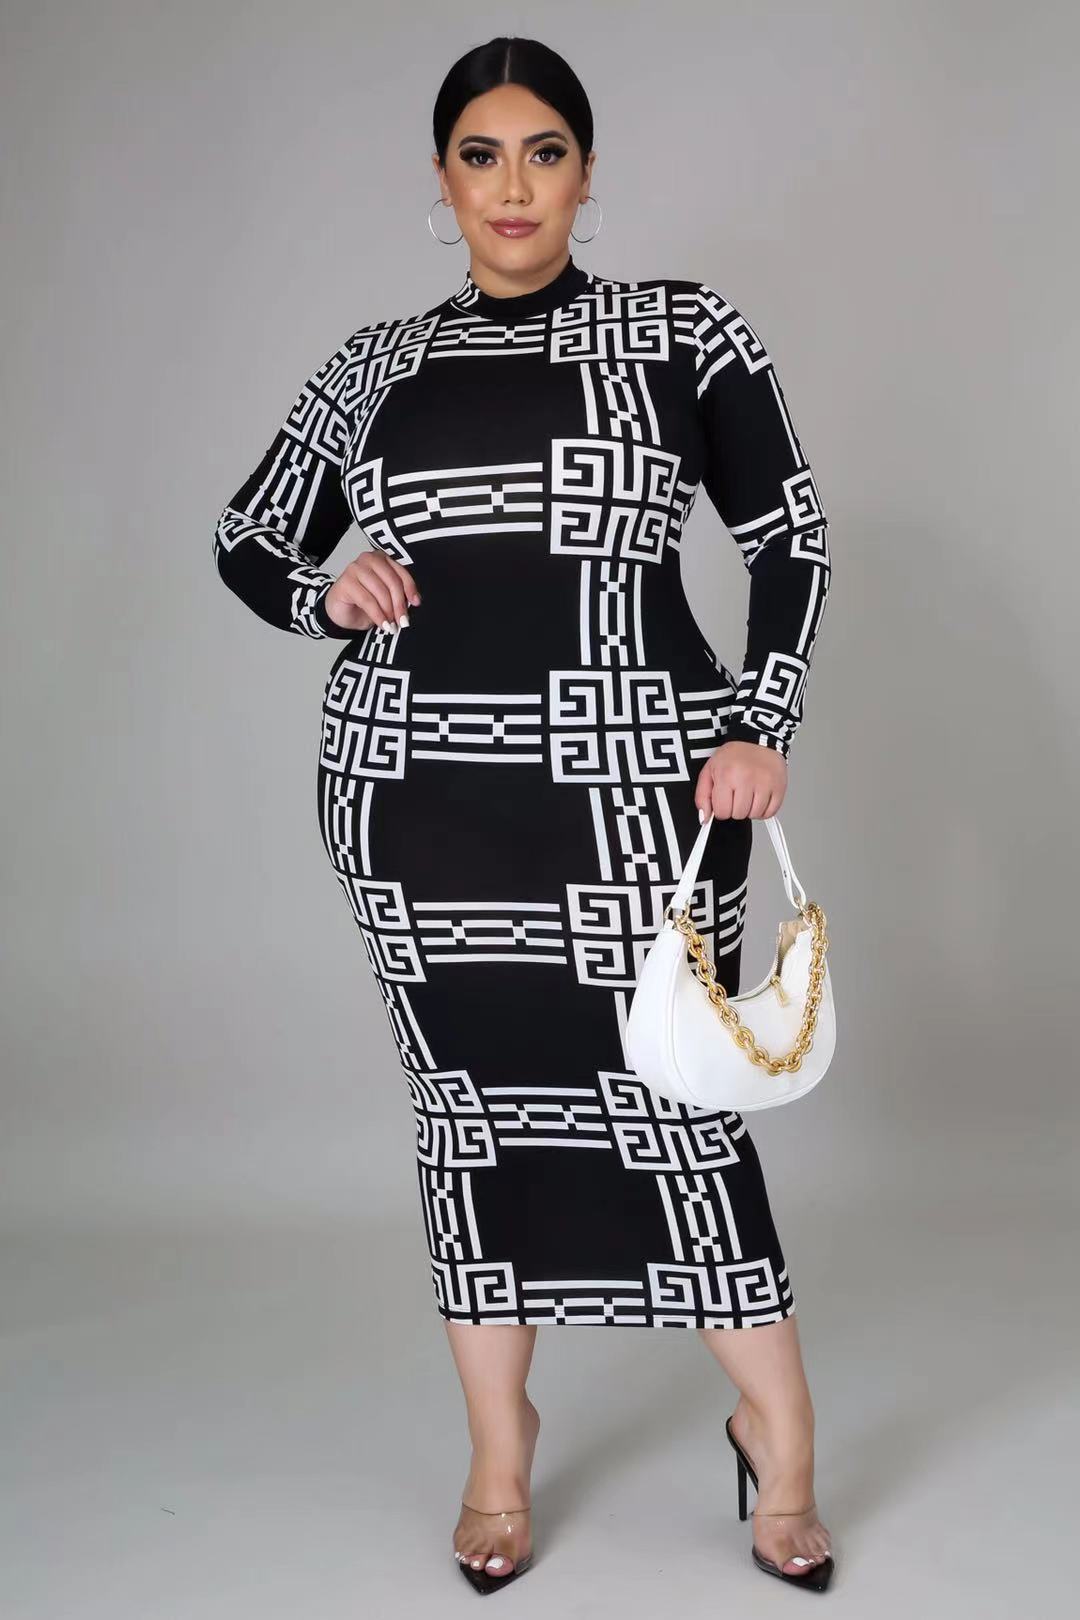 Plus Size Long Sleeve Bodycon Cocktail Dress